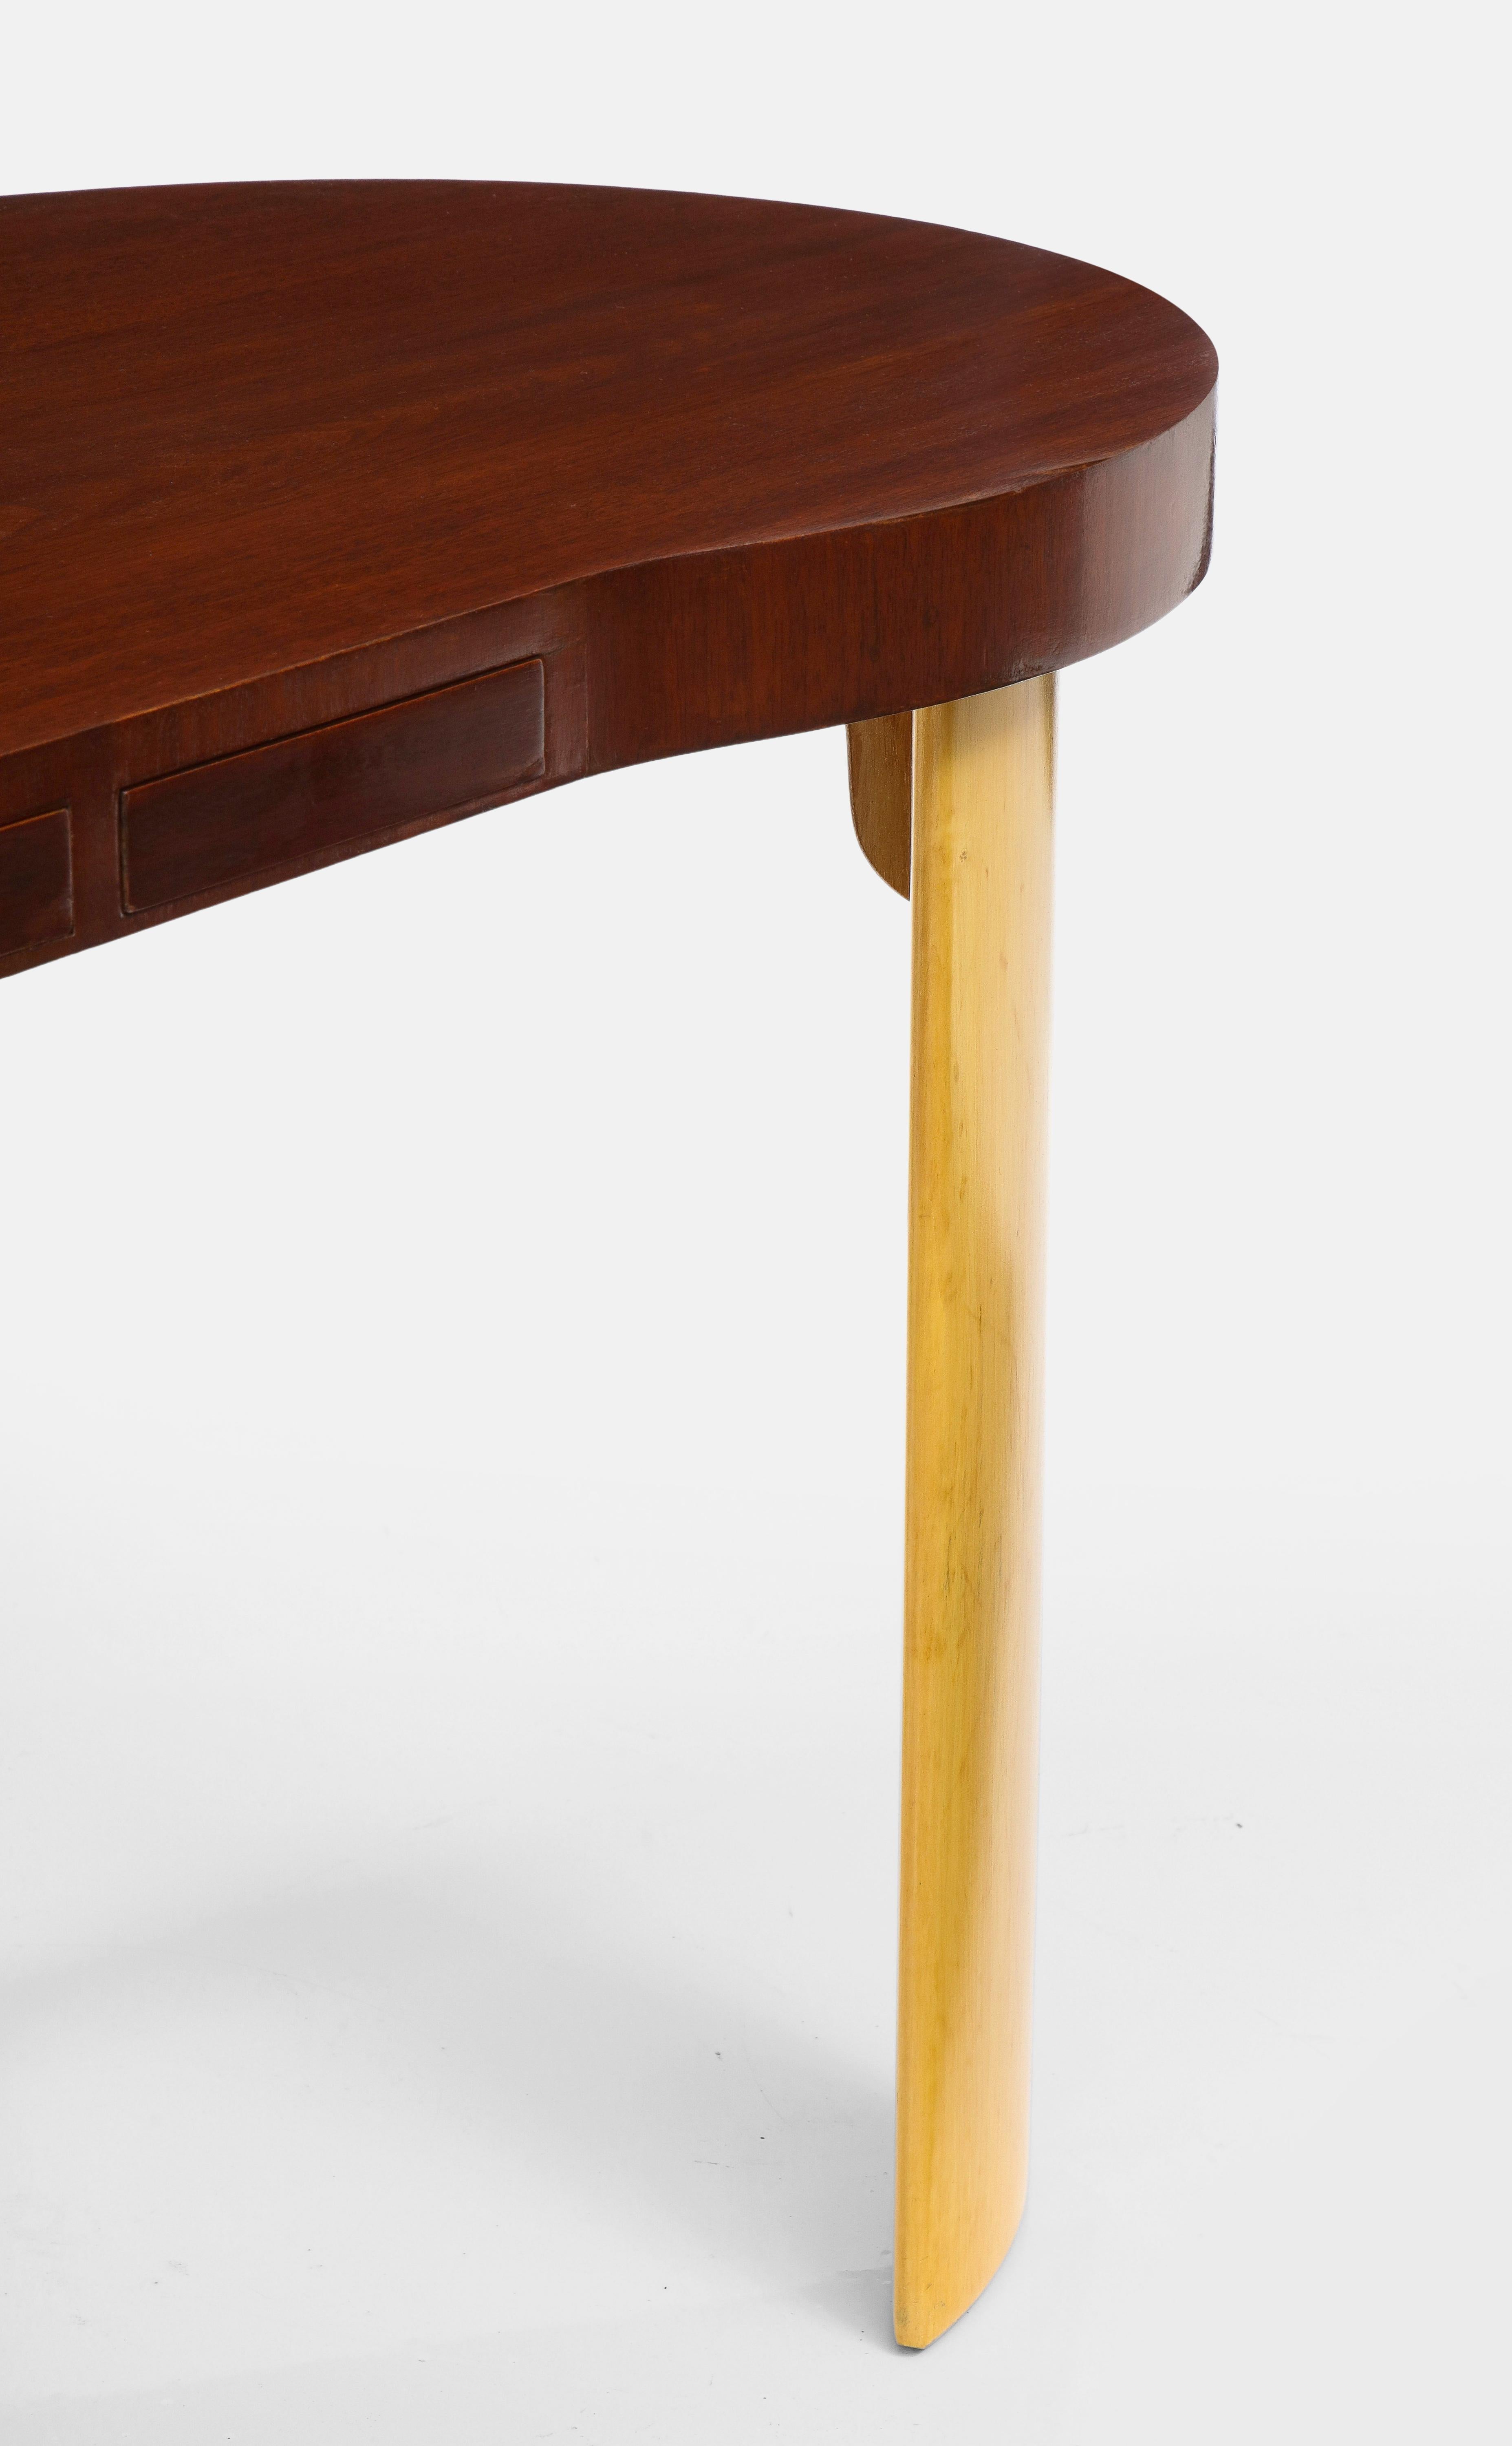 Paul Frankl Rare Kidney Desk in Mahogany, Birch, Leather and Brass, USA, 1950s For Sale 6